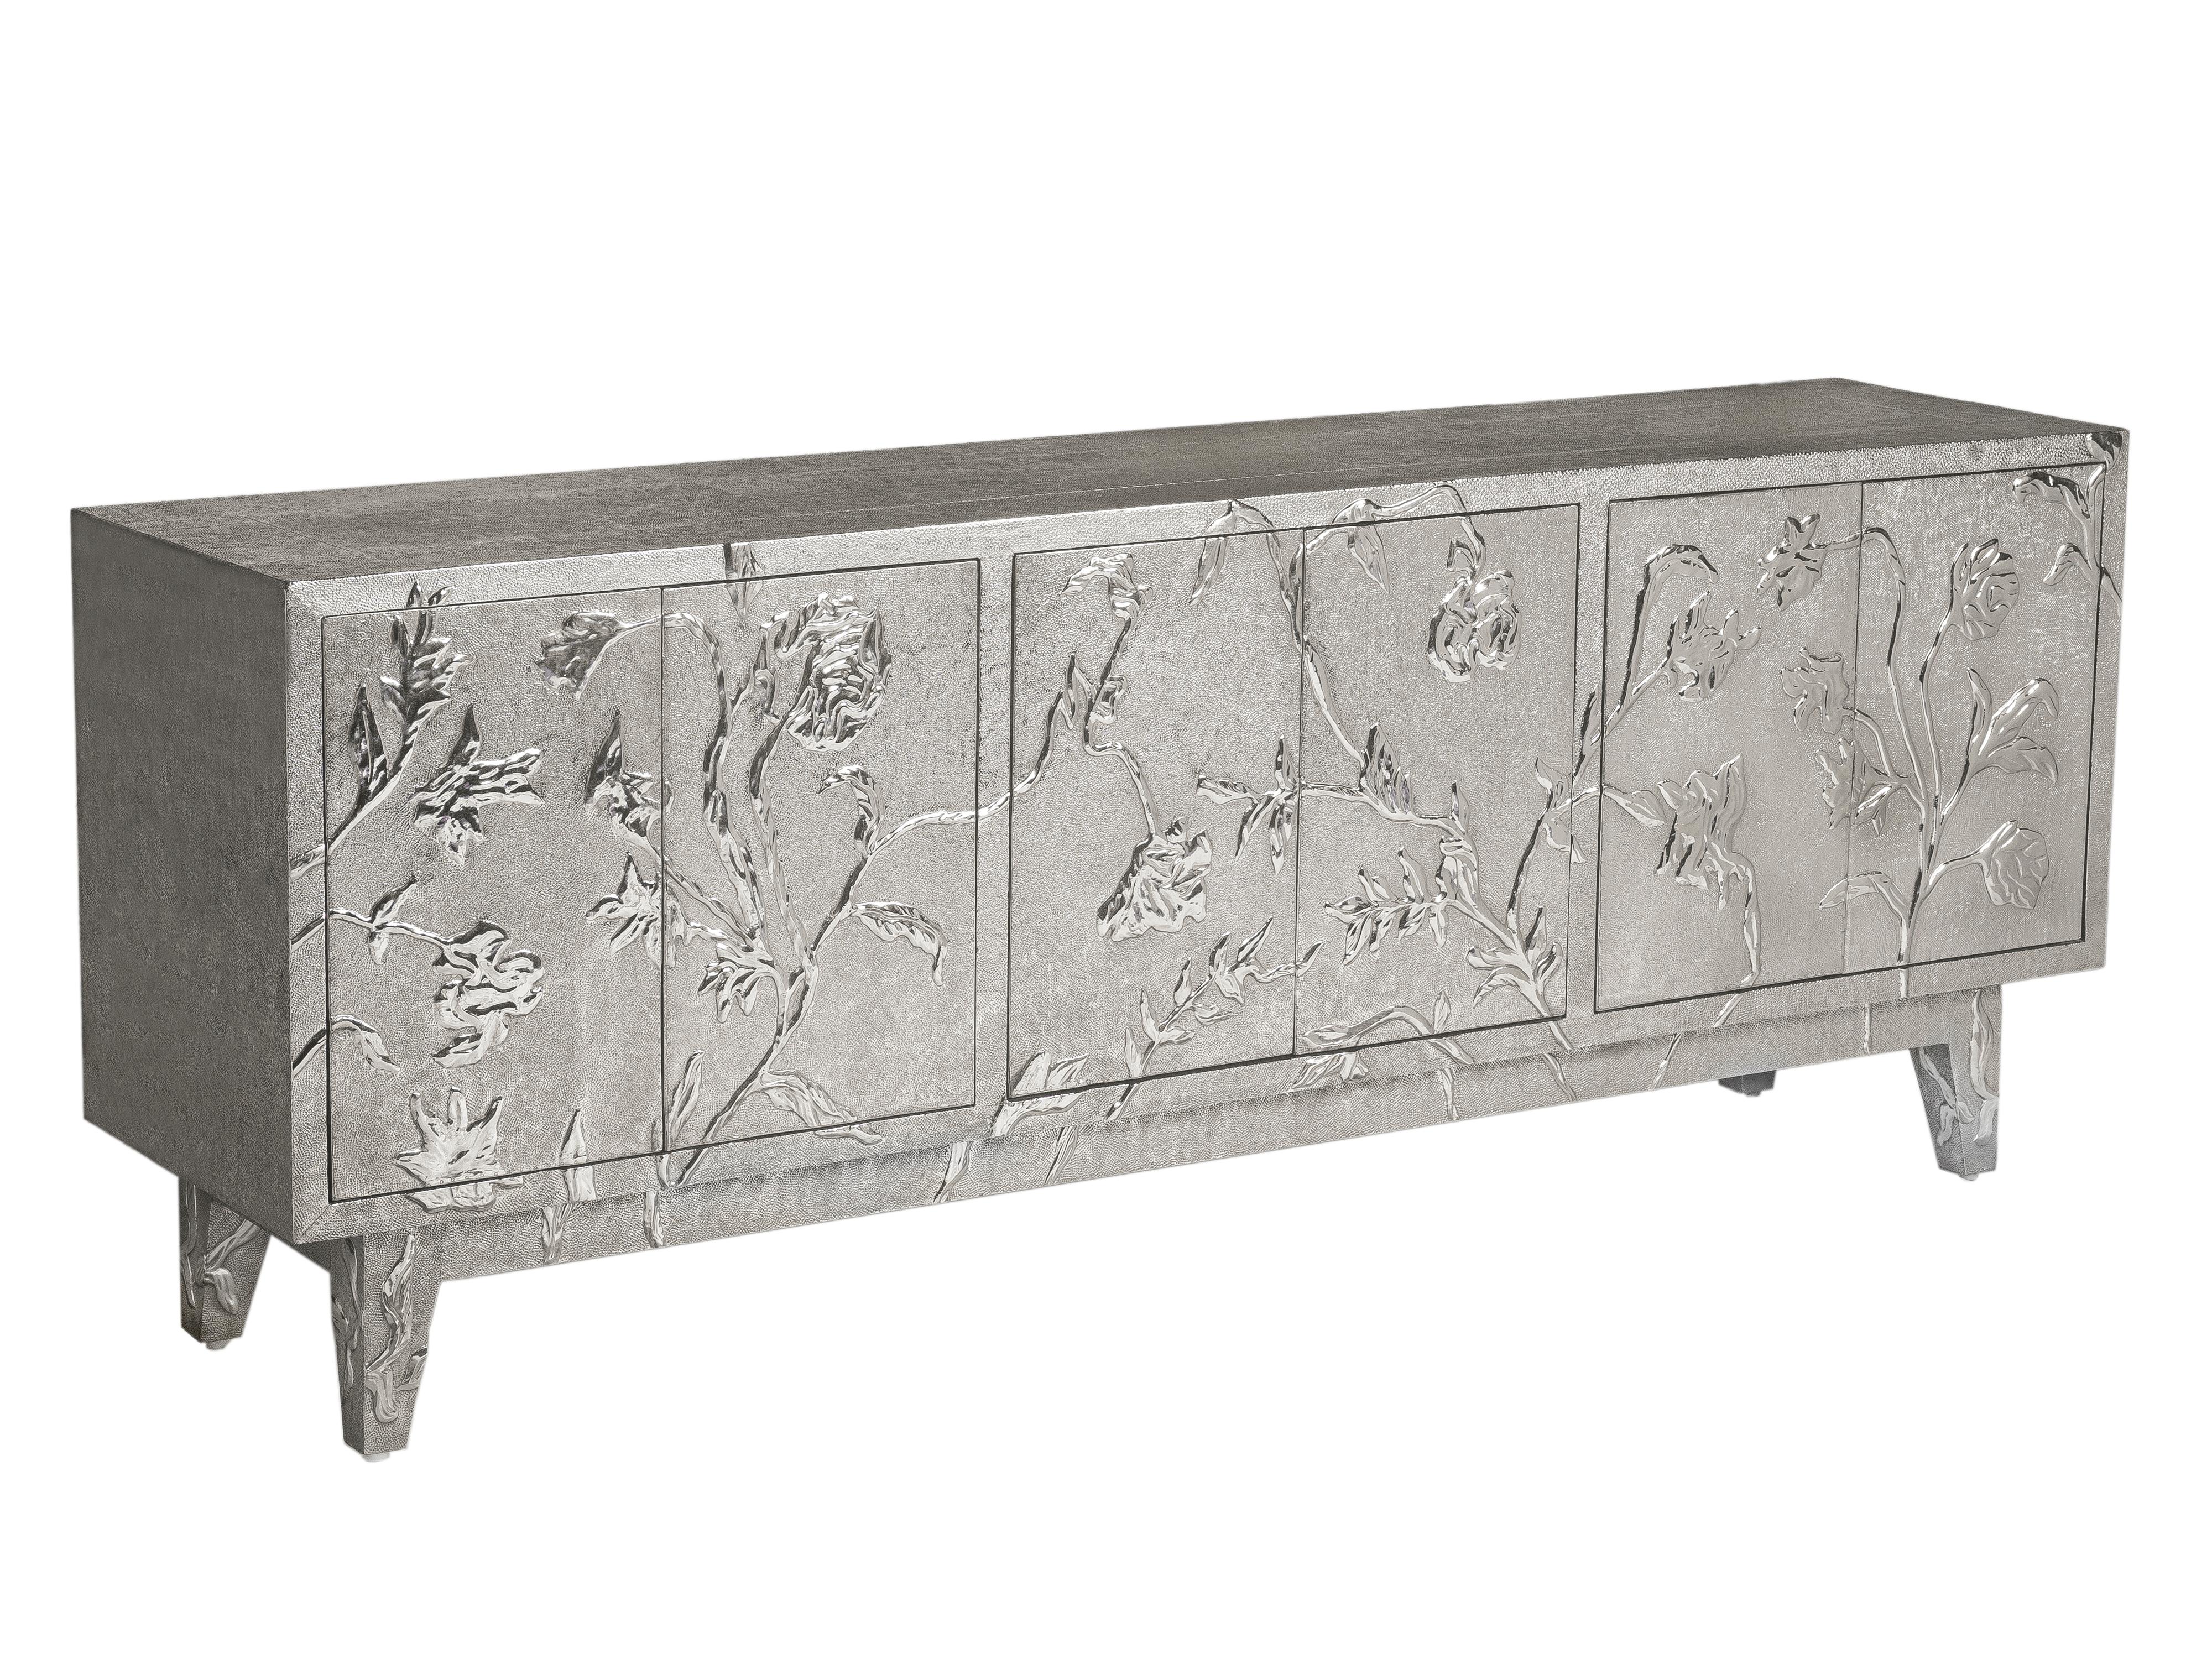 Art Deco Sideboard floral hand carved with white bronze clad on wood by Paul Mathieu is Inspired by the floral motifs used in the paintings of palaces of Rajasthan. This is one of the bestselling Art Deco Sideboard of Stephanie Odegard's collection,